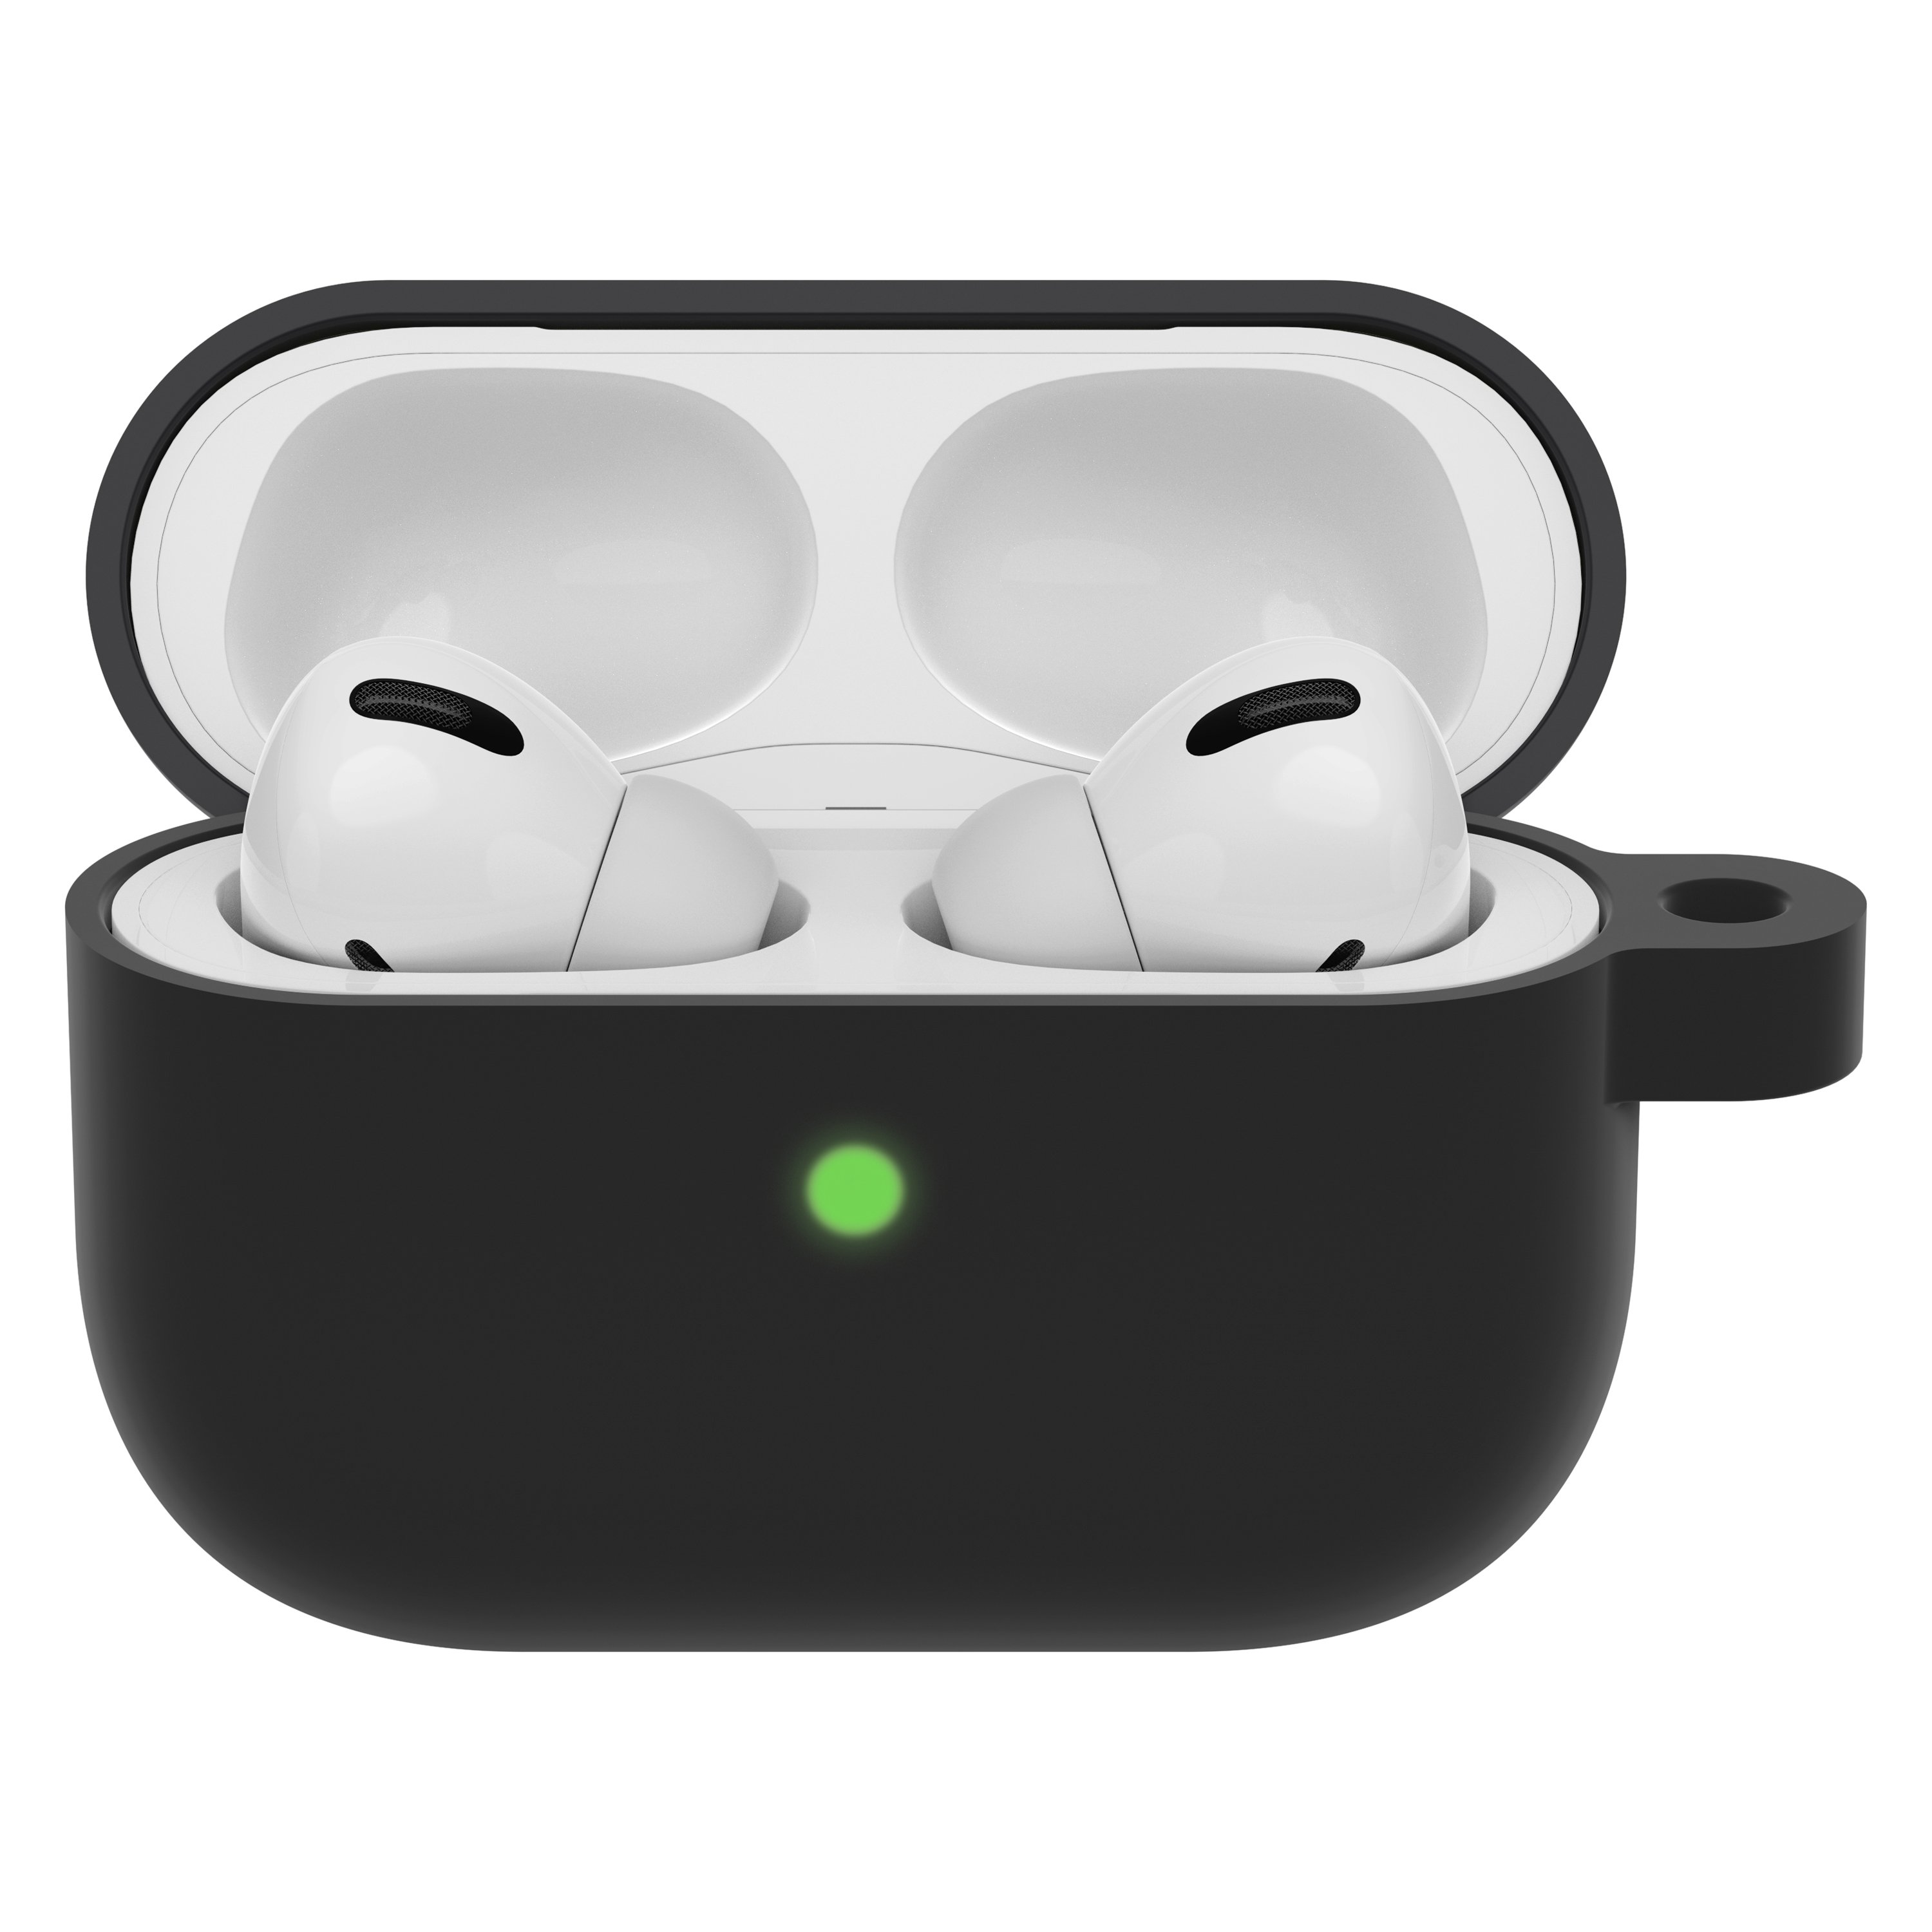 https://www.otterbox.com/on/demandware.static/-/Sites-masterCatalog/default/dw491da8e9/productimages/dis/cases-screen-protection/soft-touch-airpods-pro/soft-touch-airpods-pro-blacktaffy-1.jpg